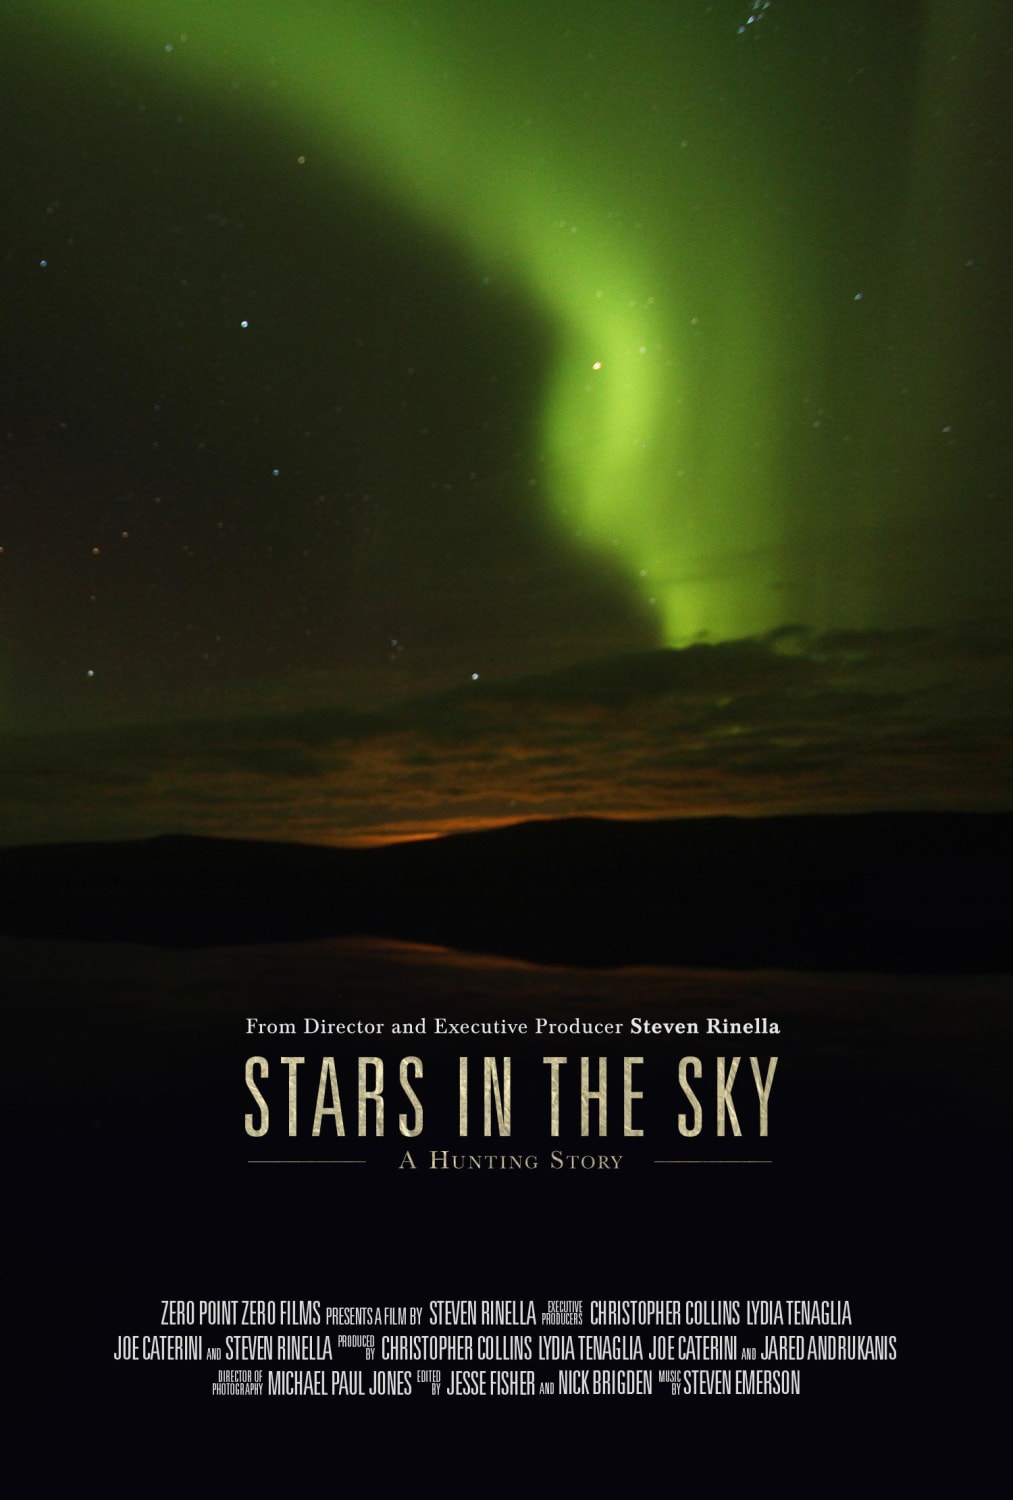 If you have Netflix do yourself a favor and watch “Steve Rinellas Stars in the Sky” It’s and incredibly well made hunting documentary